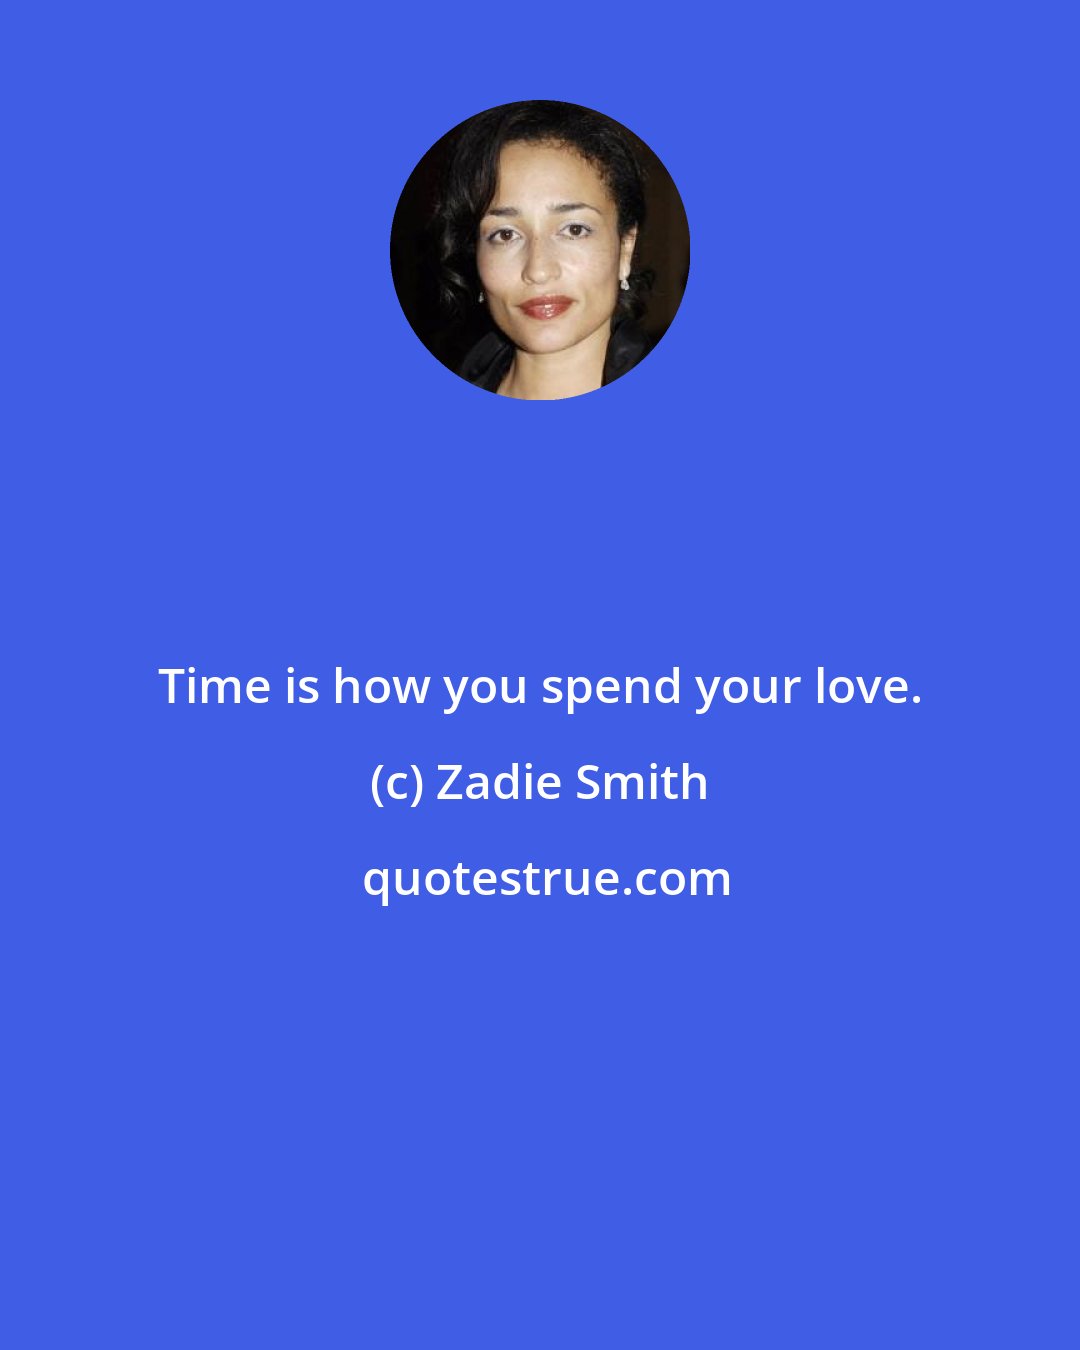 Zadie Smith: Time is how you spend your love.